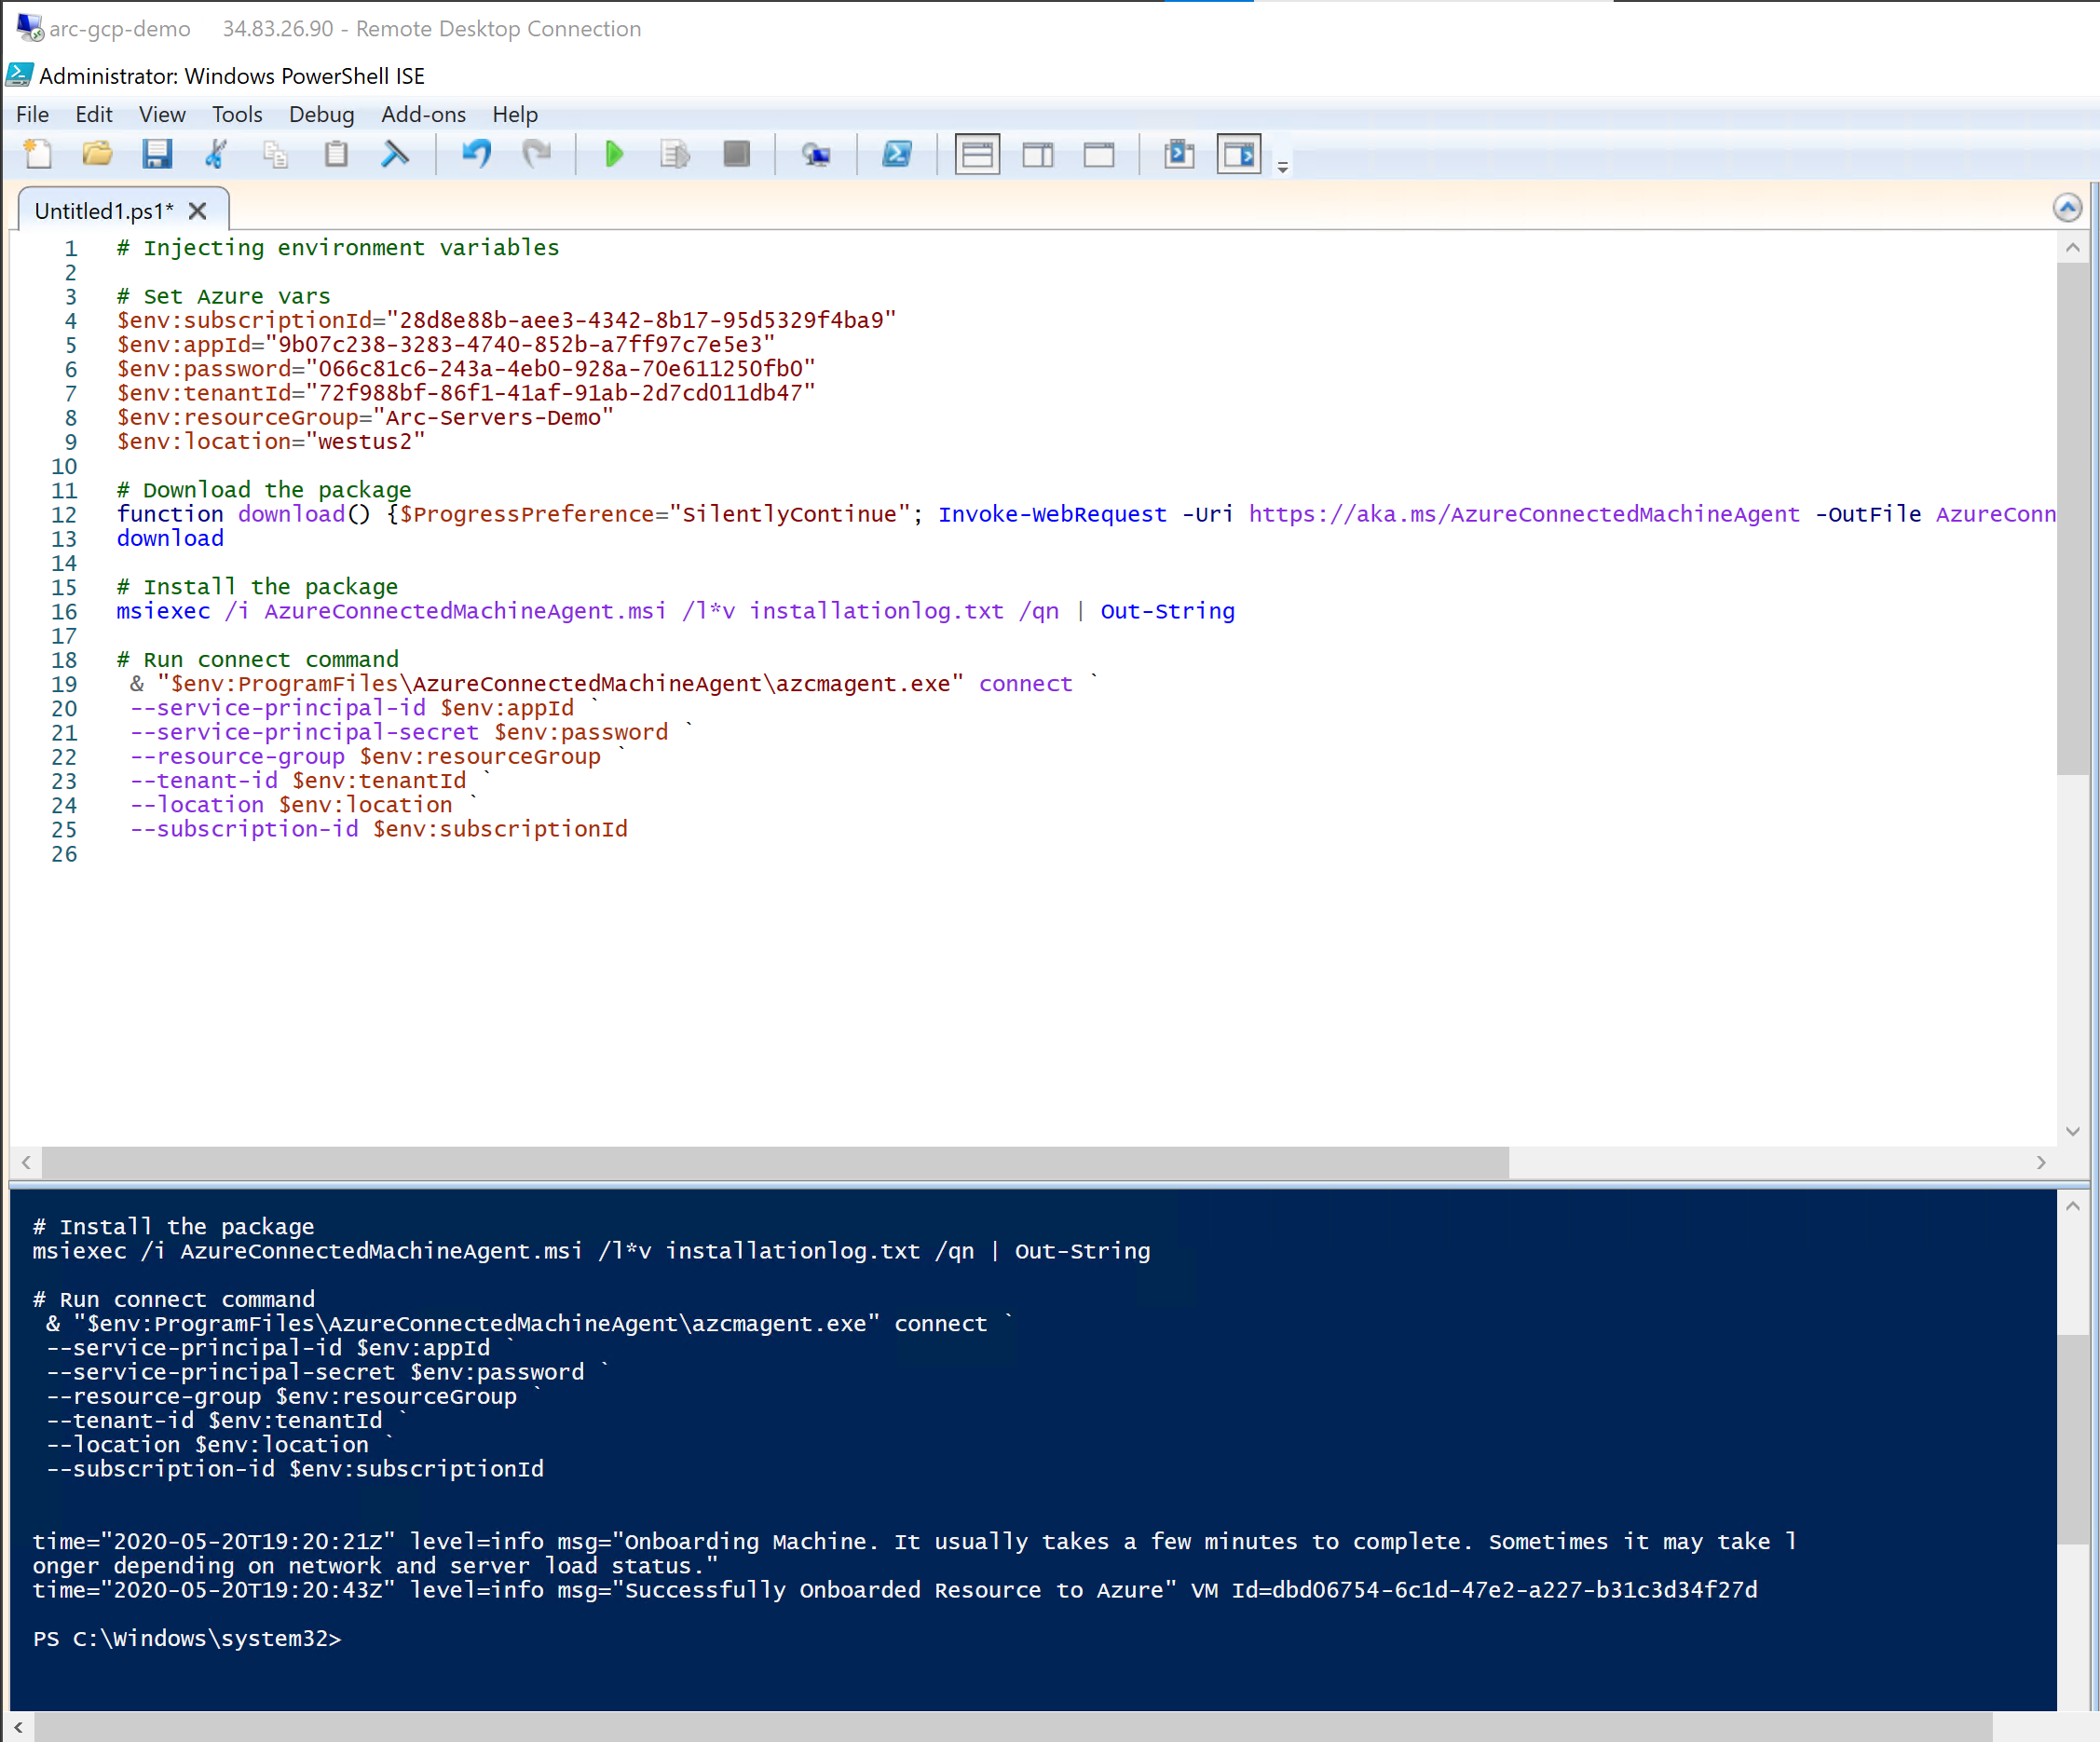 Screenshot showing the Windows PowerShell integrated scripting environment with an Azure Arc agent connection script.